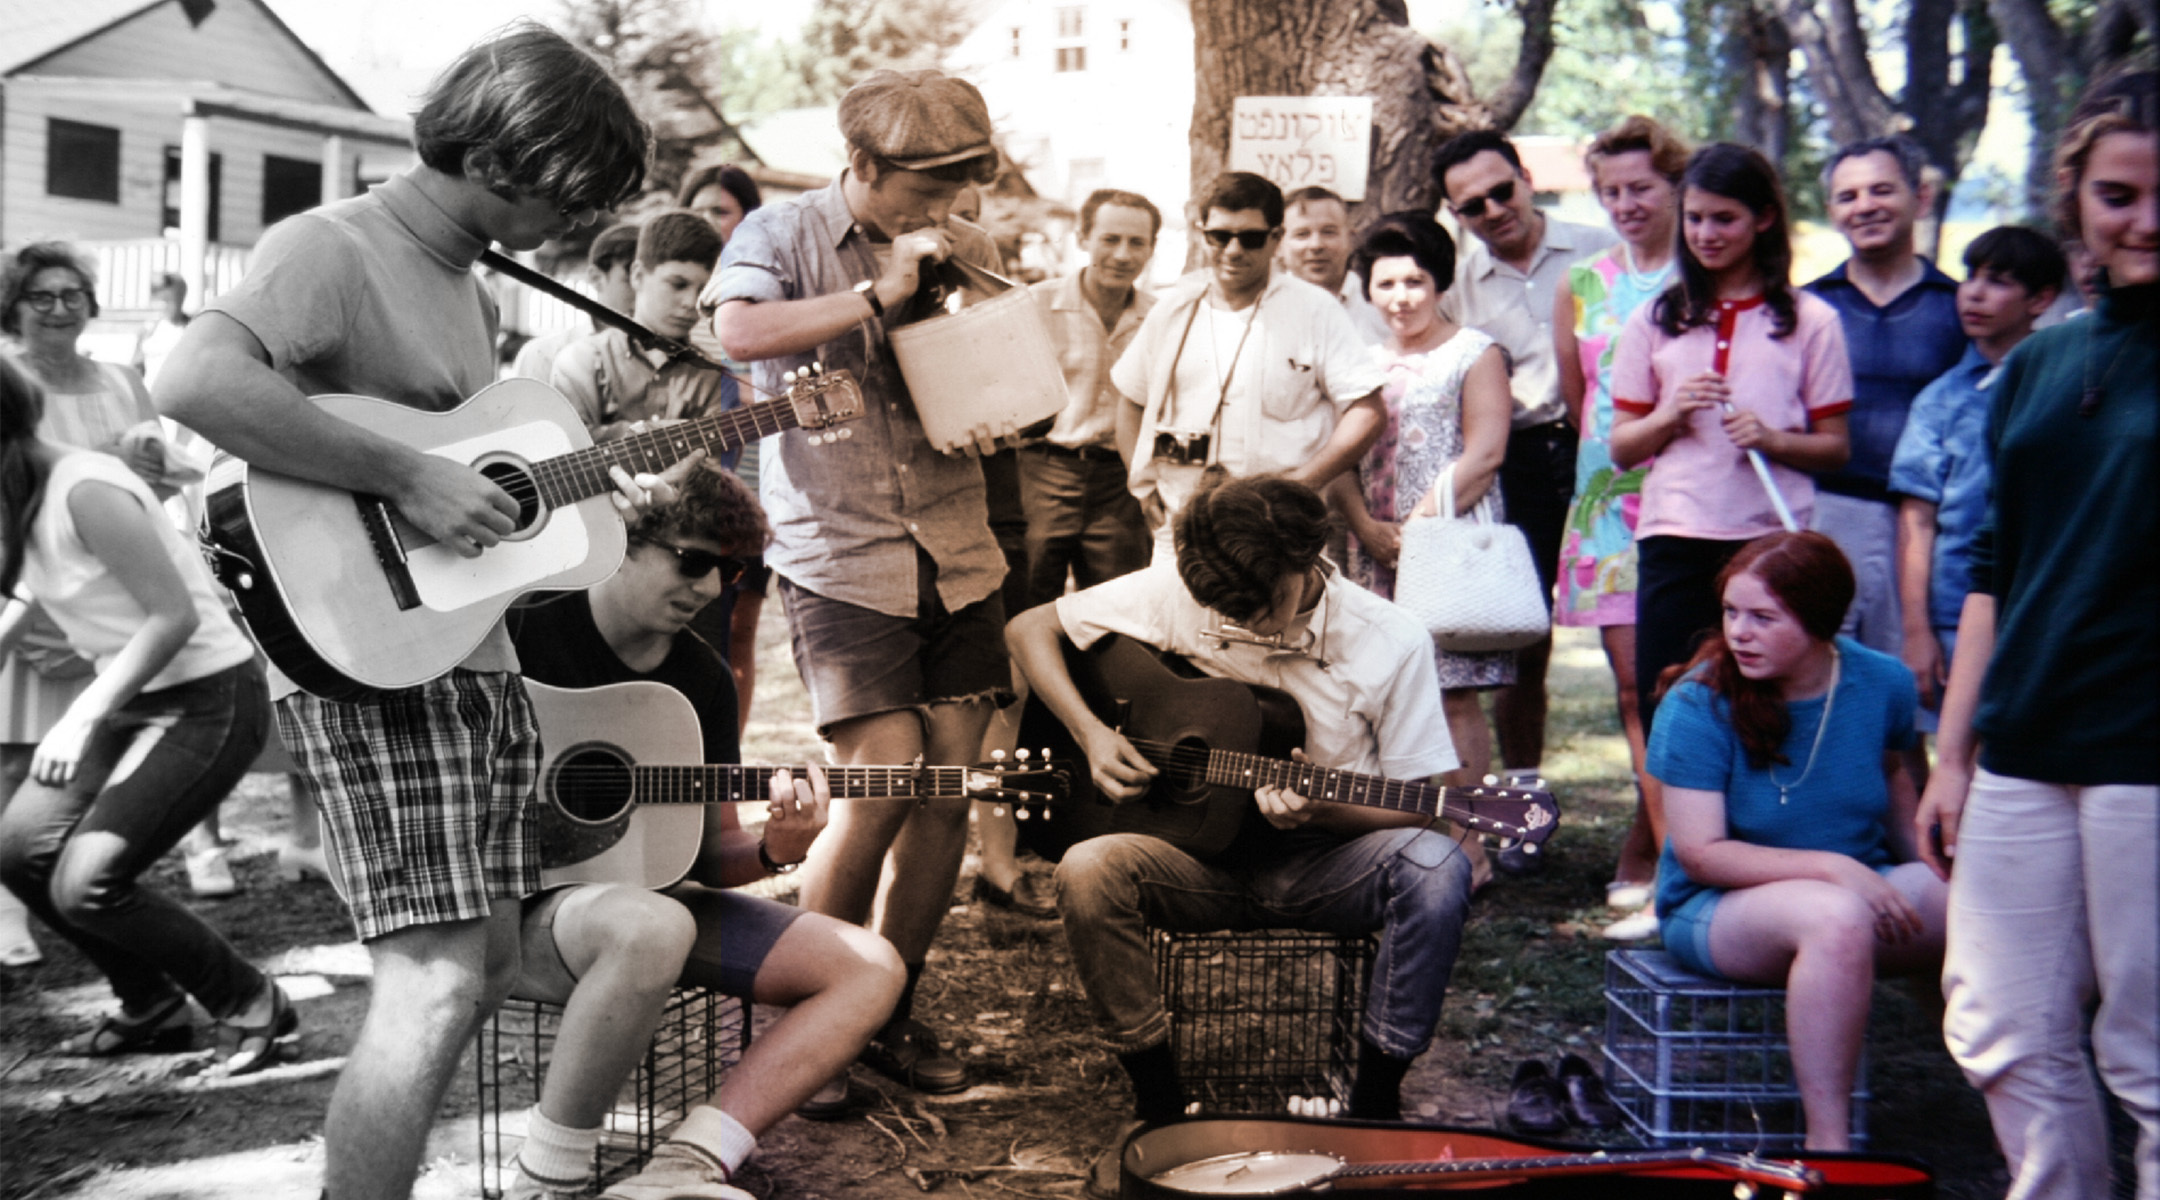 American summer camps changed in significant ways over the decades, even as they remained a consistent feature of American Jewish life, according to historian Sandra Fox. (Photo of Boys playing guitar at Camp Hemshekh in the late 1960s courtesy of Kolodny Family Archives; illustration by Mollie Suss)